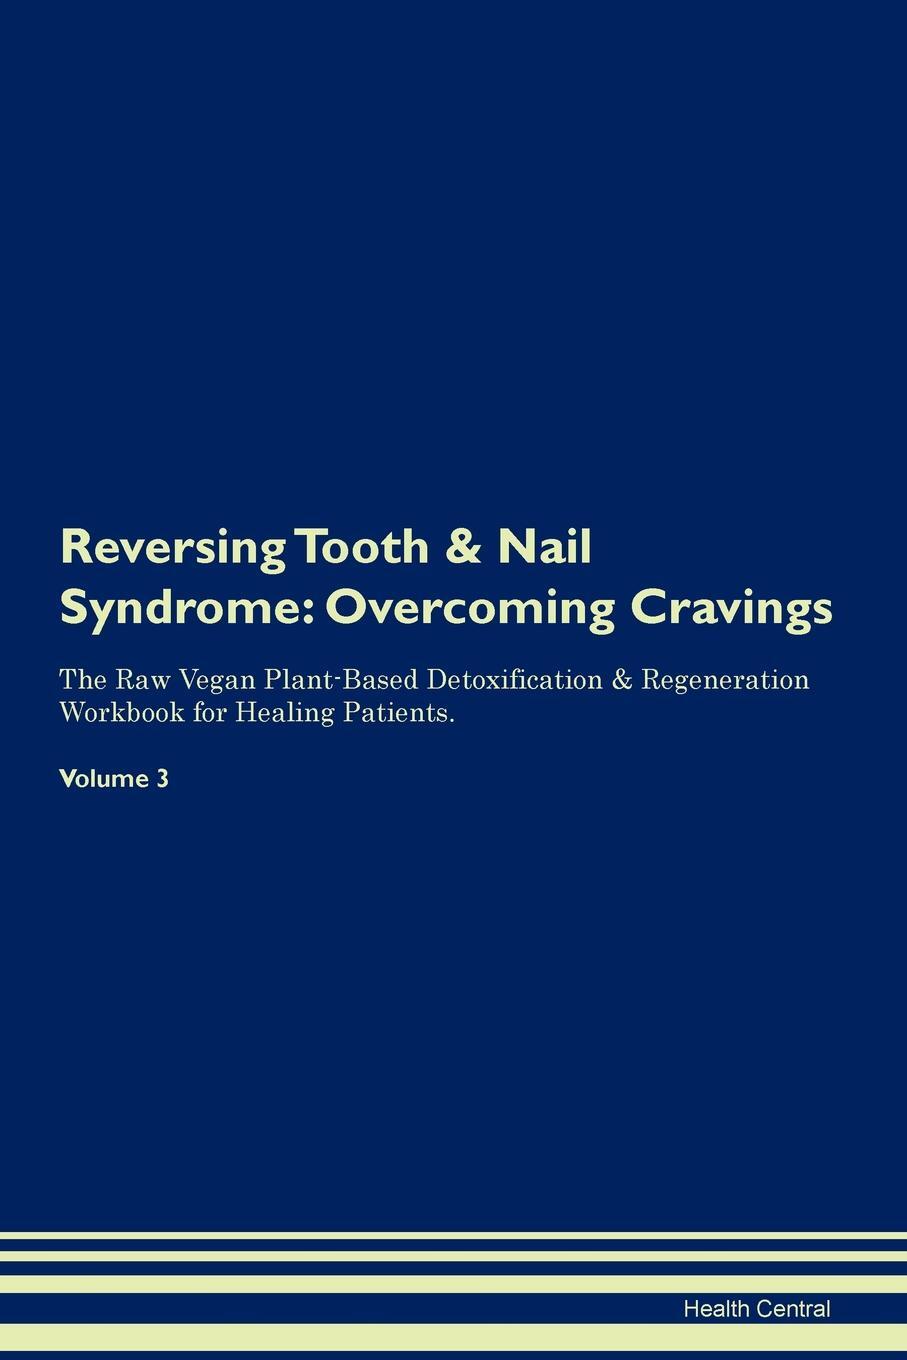 фото Reversing Tooth & Nail Syndrome. Overcoming Cravings The Raw Vegan Plant-Based Detoxification & Regeneration Workbook for Healing Patients. Volume 3